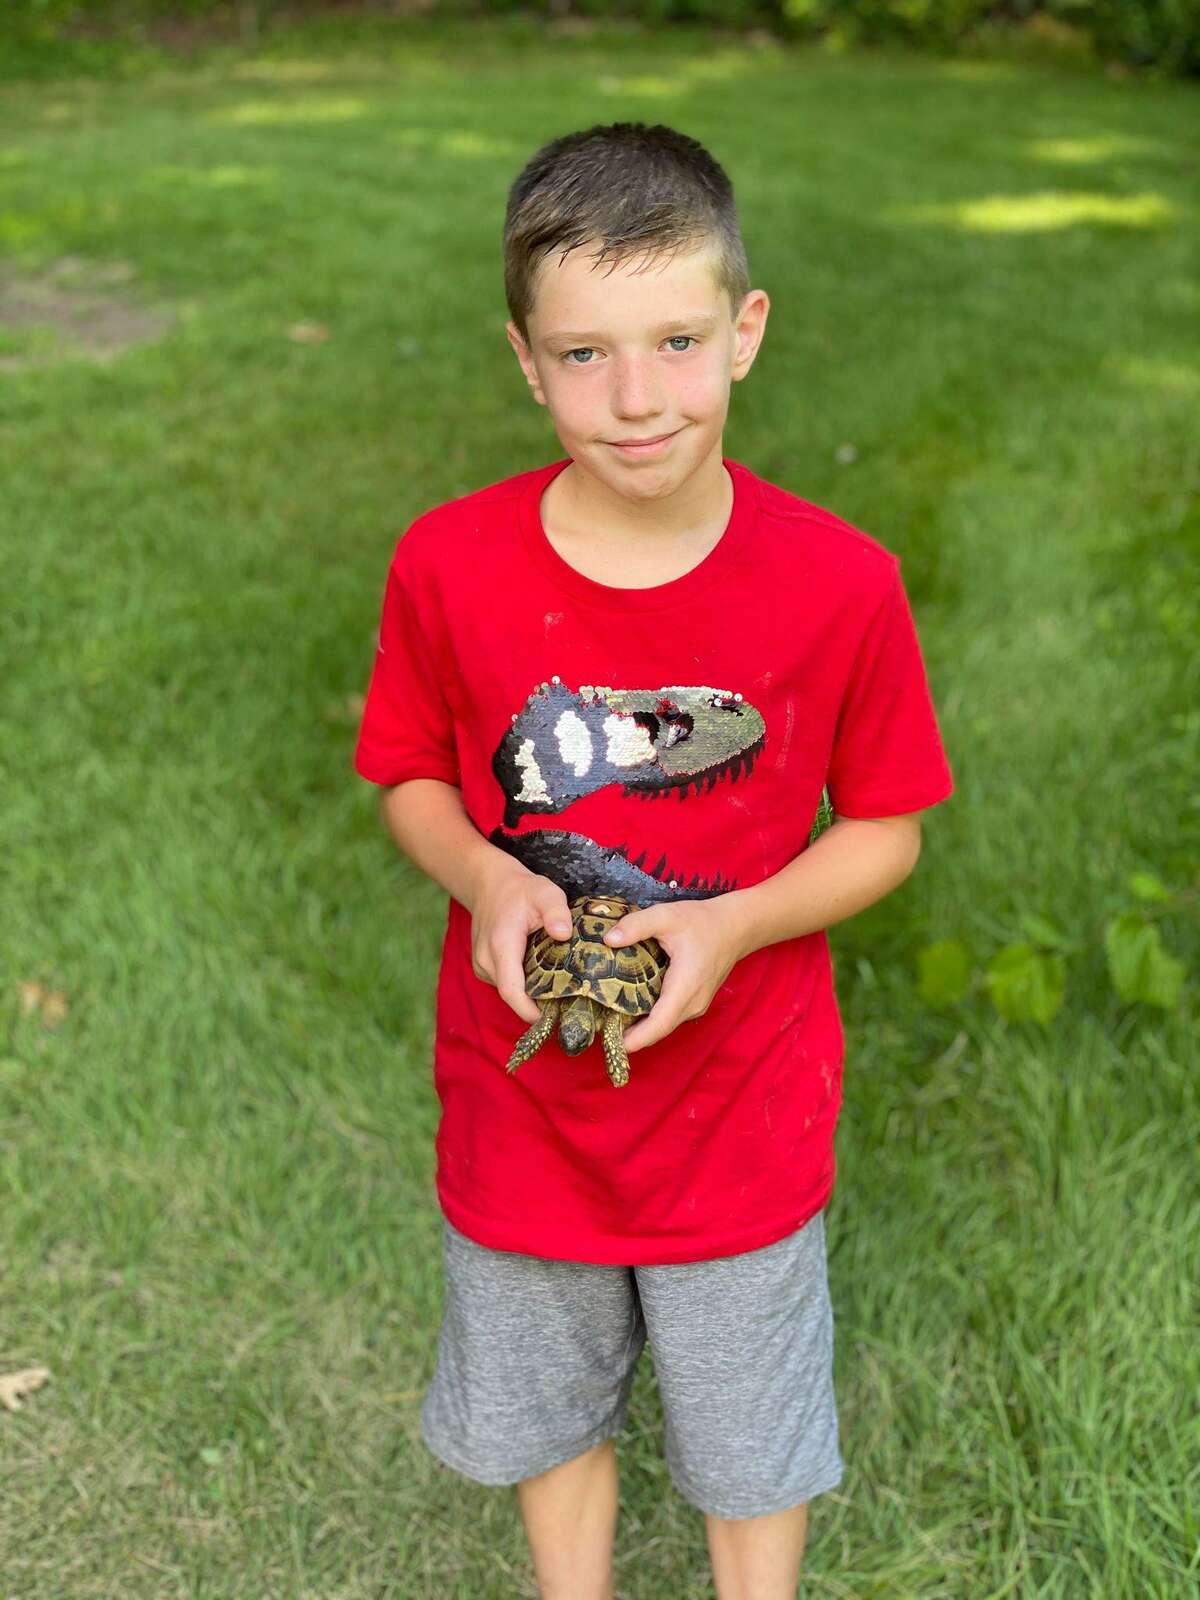 Rex Oliveira with his pet tortoise Speedy, who is back home after a month-long escape. A heart painted on Speedy's back helped Rex and his family connect with the people who found him.